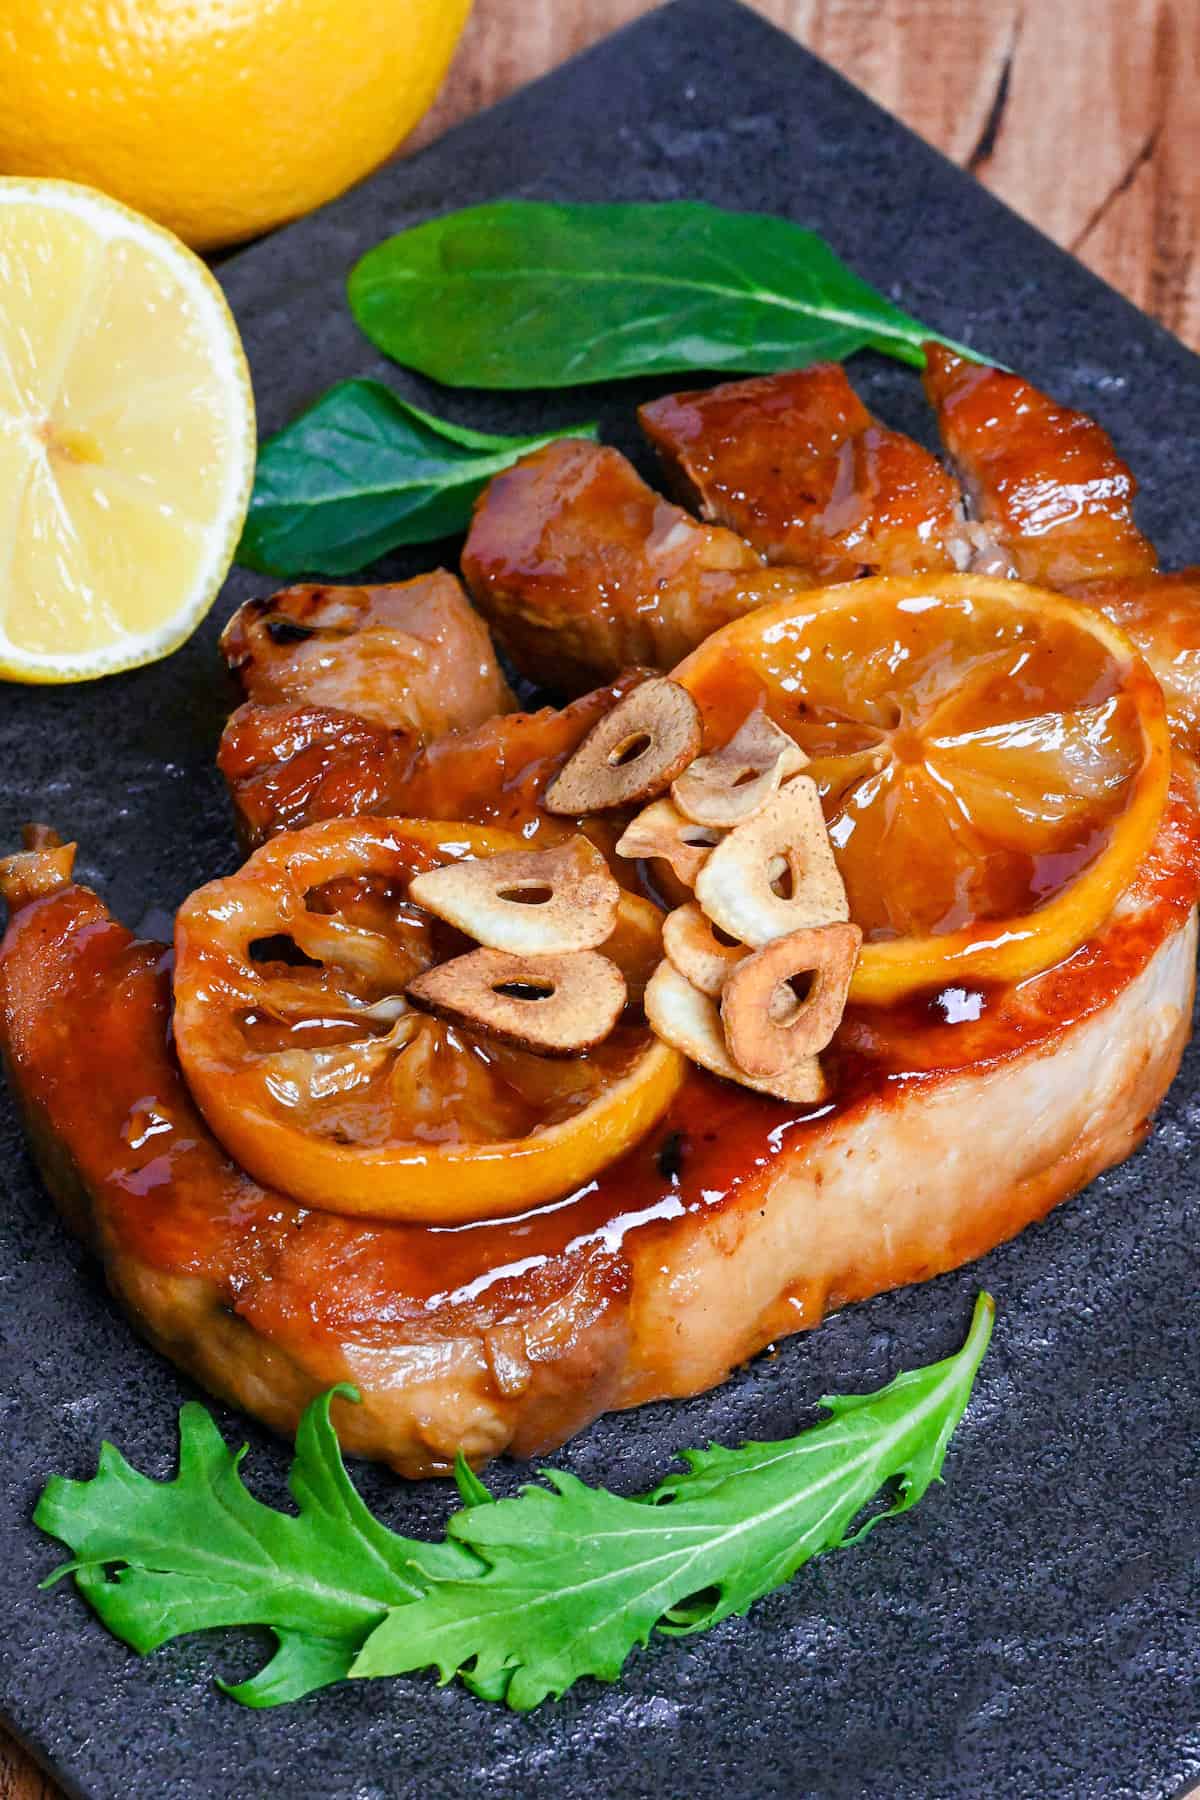 Lemon Teriyaki Pork Chop topped with lemon slices and fried garlic chips on a black slate-style square plate with pan fried mushrooms and salad leaves